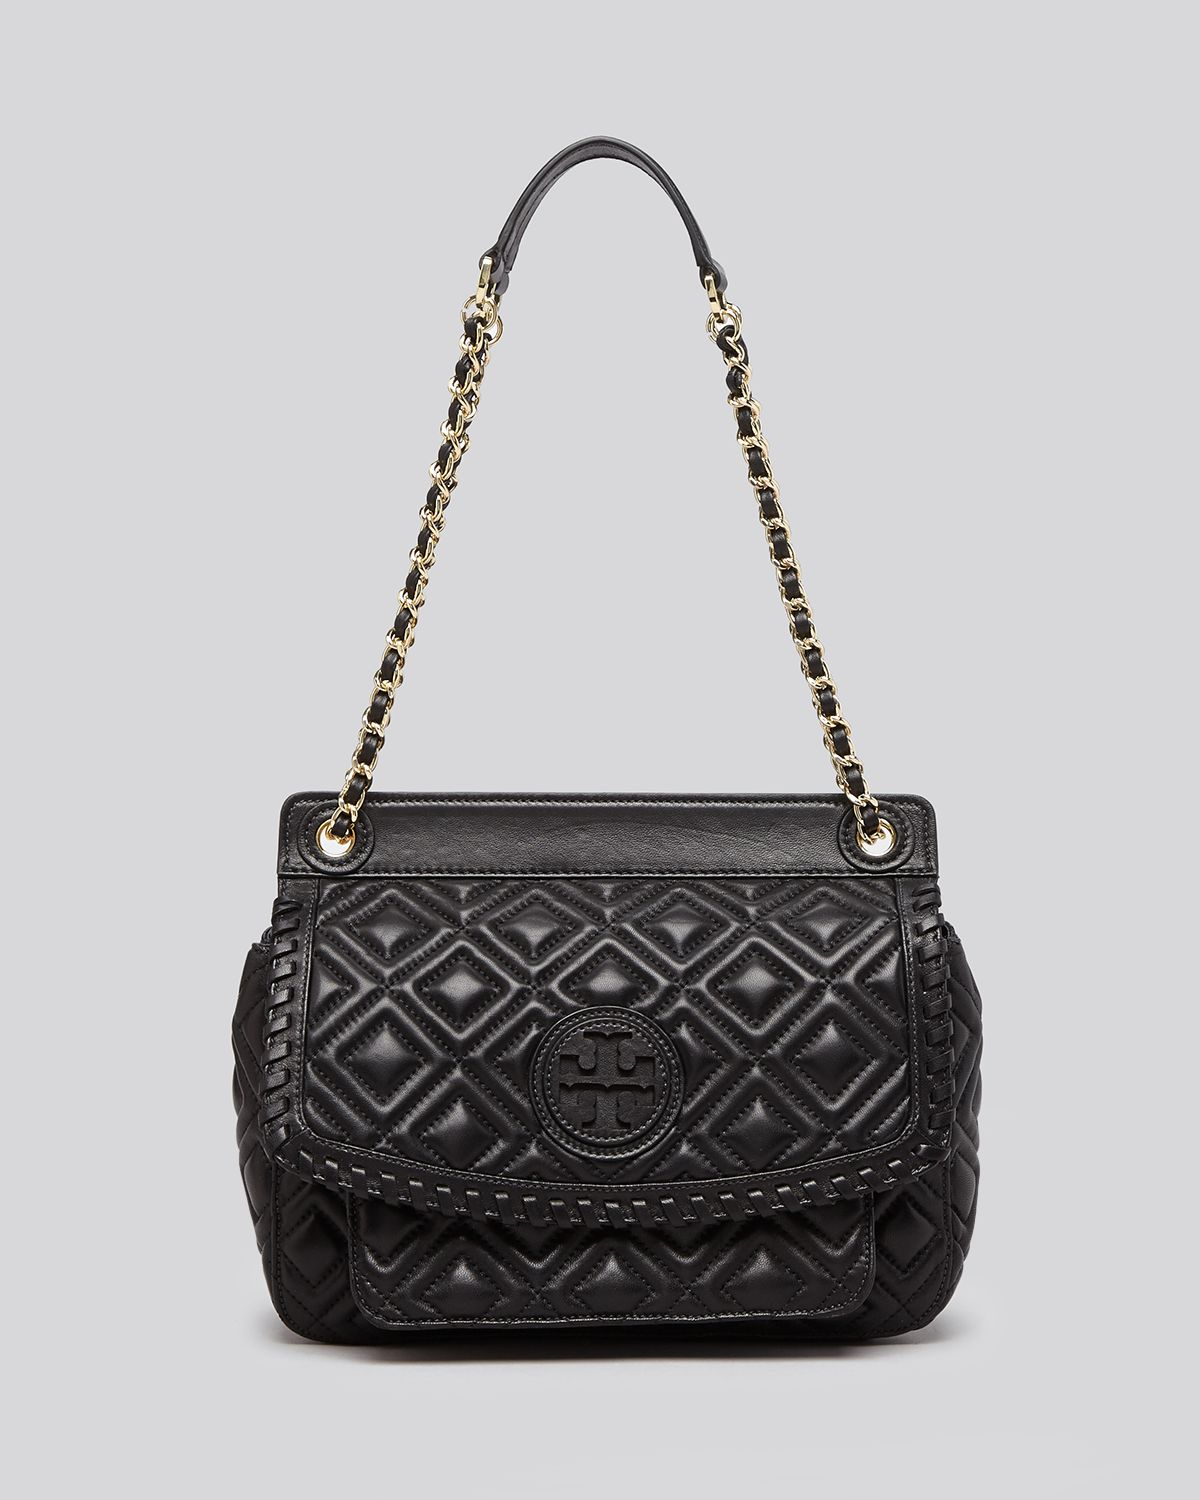 Lyst - Tory burch Shoulder Bag - Marion Quilted Small in Black